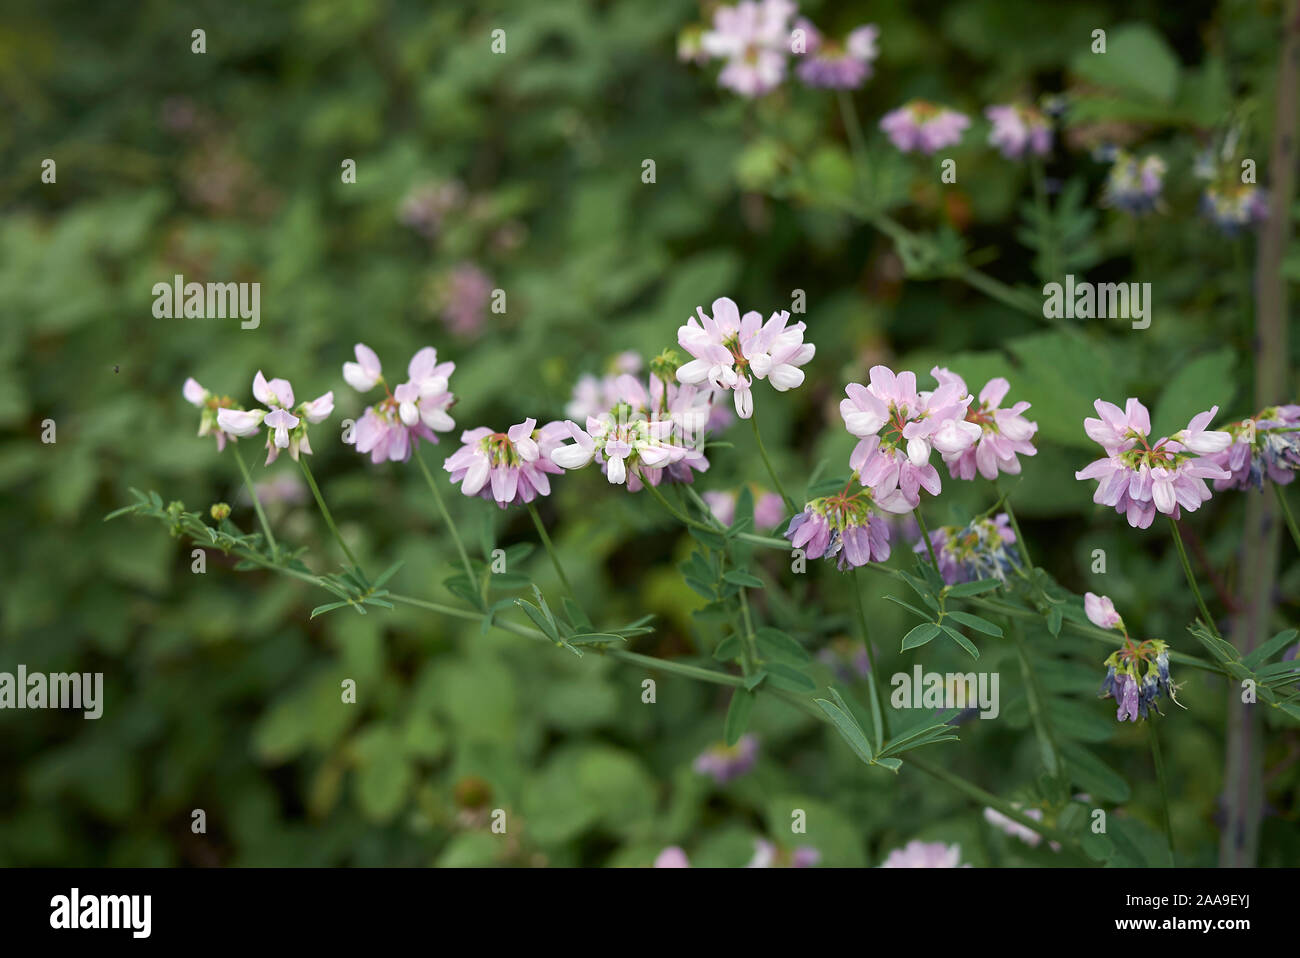 white and pink flowers of Securigera varia plant Stock Photo